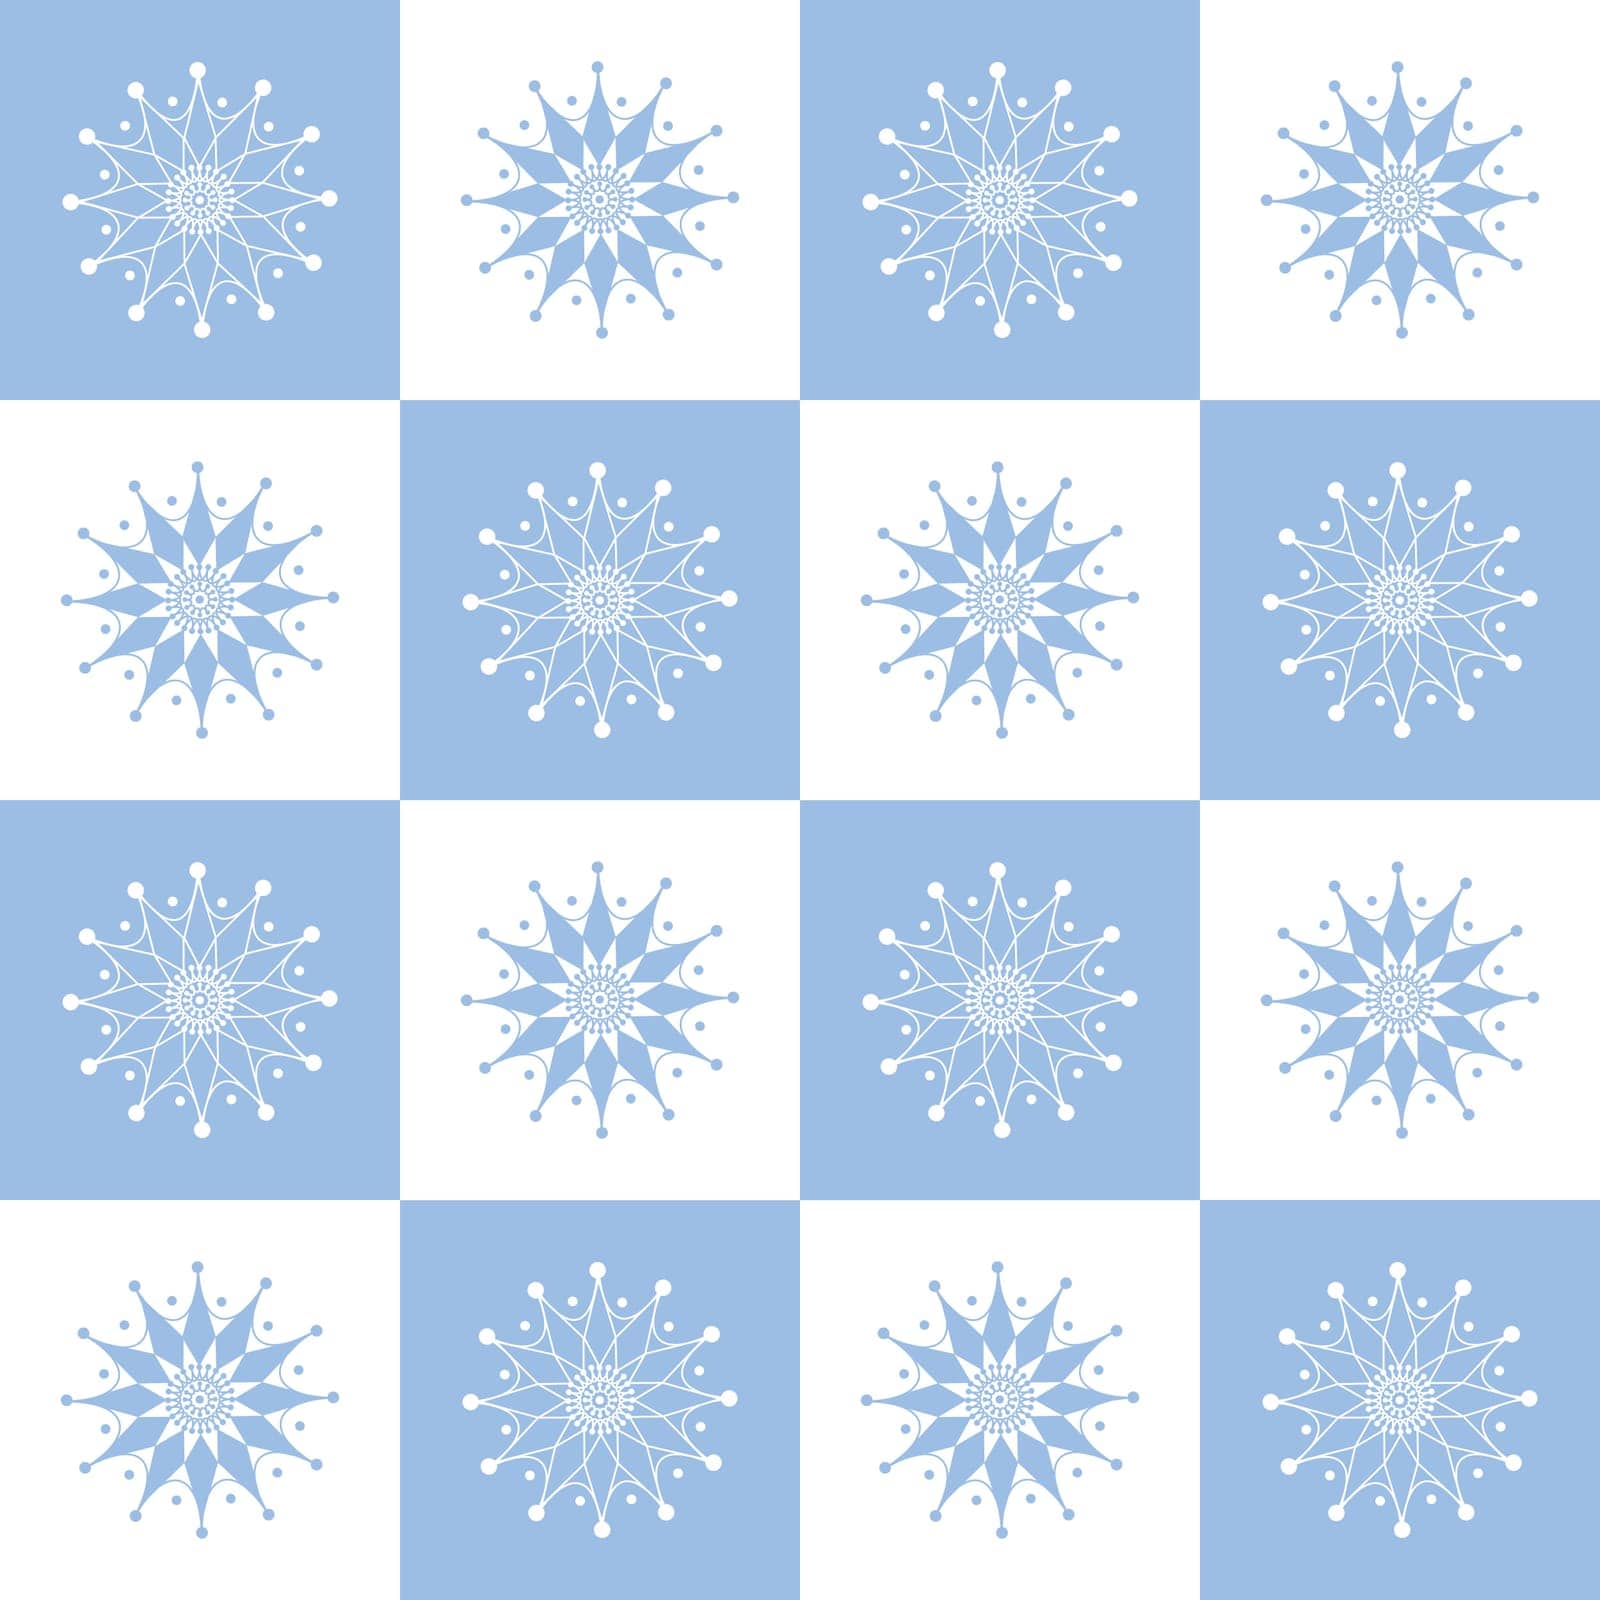 Snowflakes in diamonds pattern. Seamless pattern with the image of snowflakes arranged in geometric shapes. Winter Christmas snow pattern on a blue background. Vector.